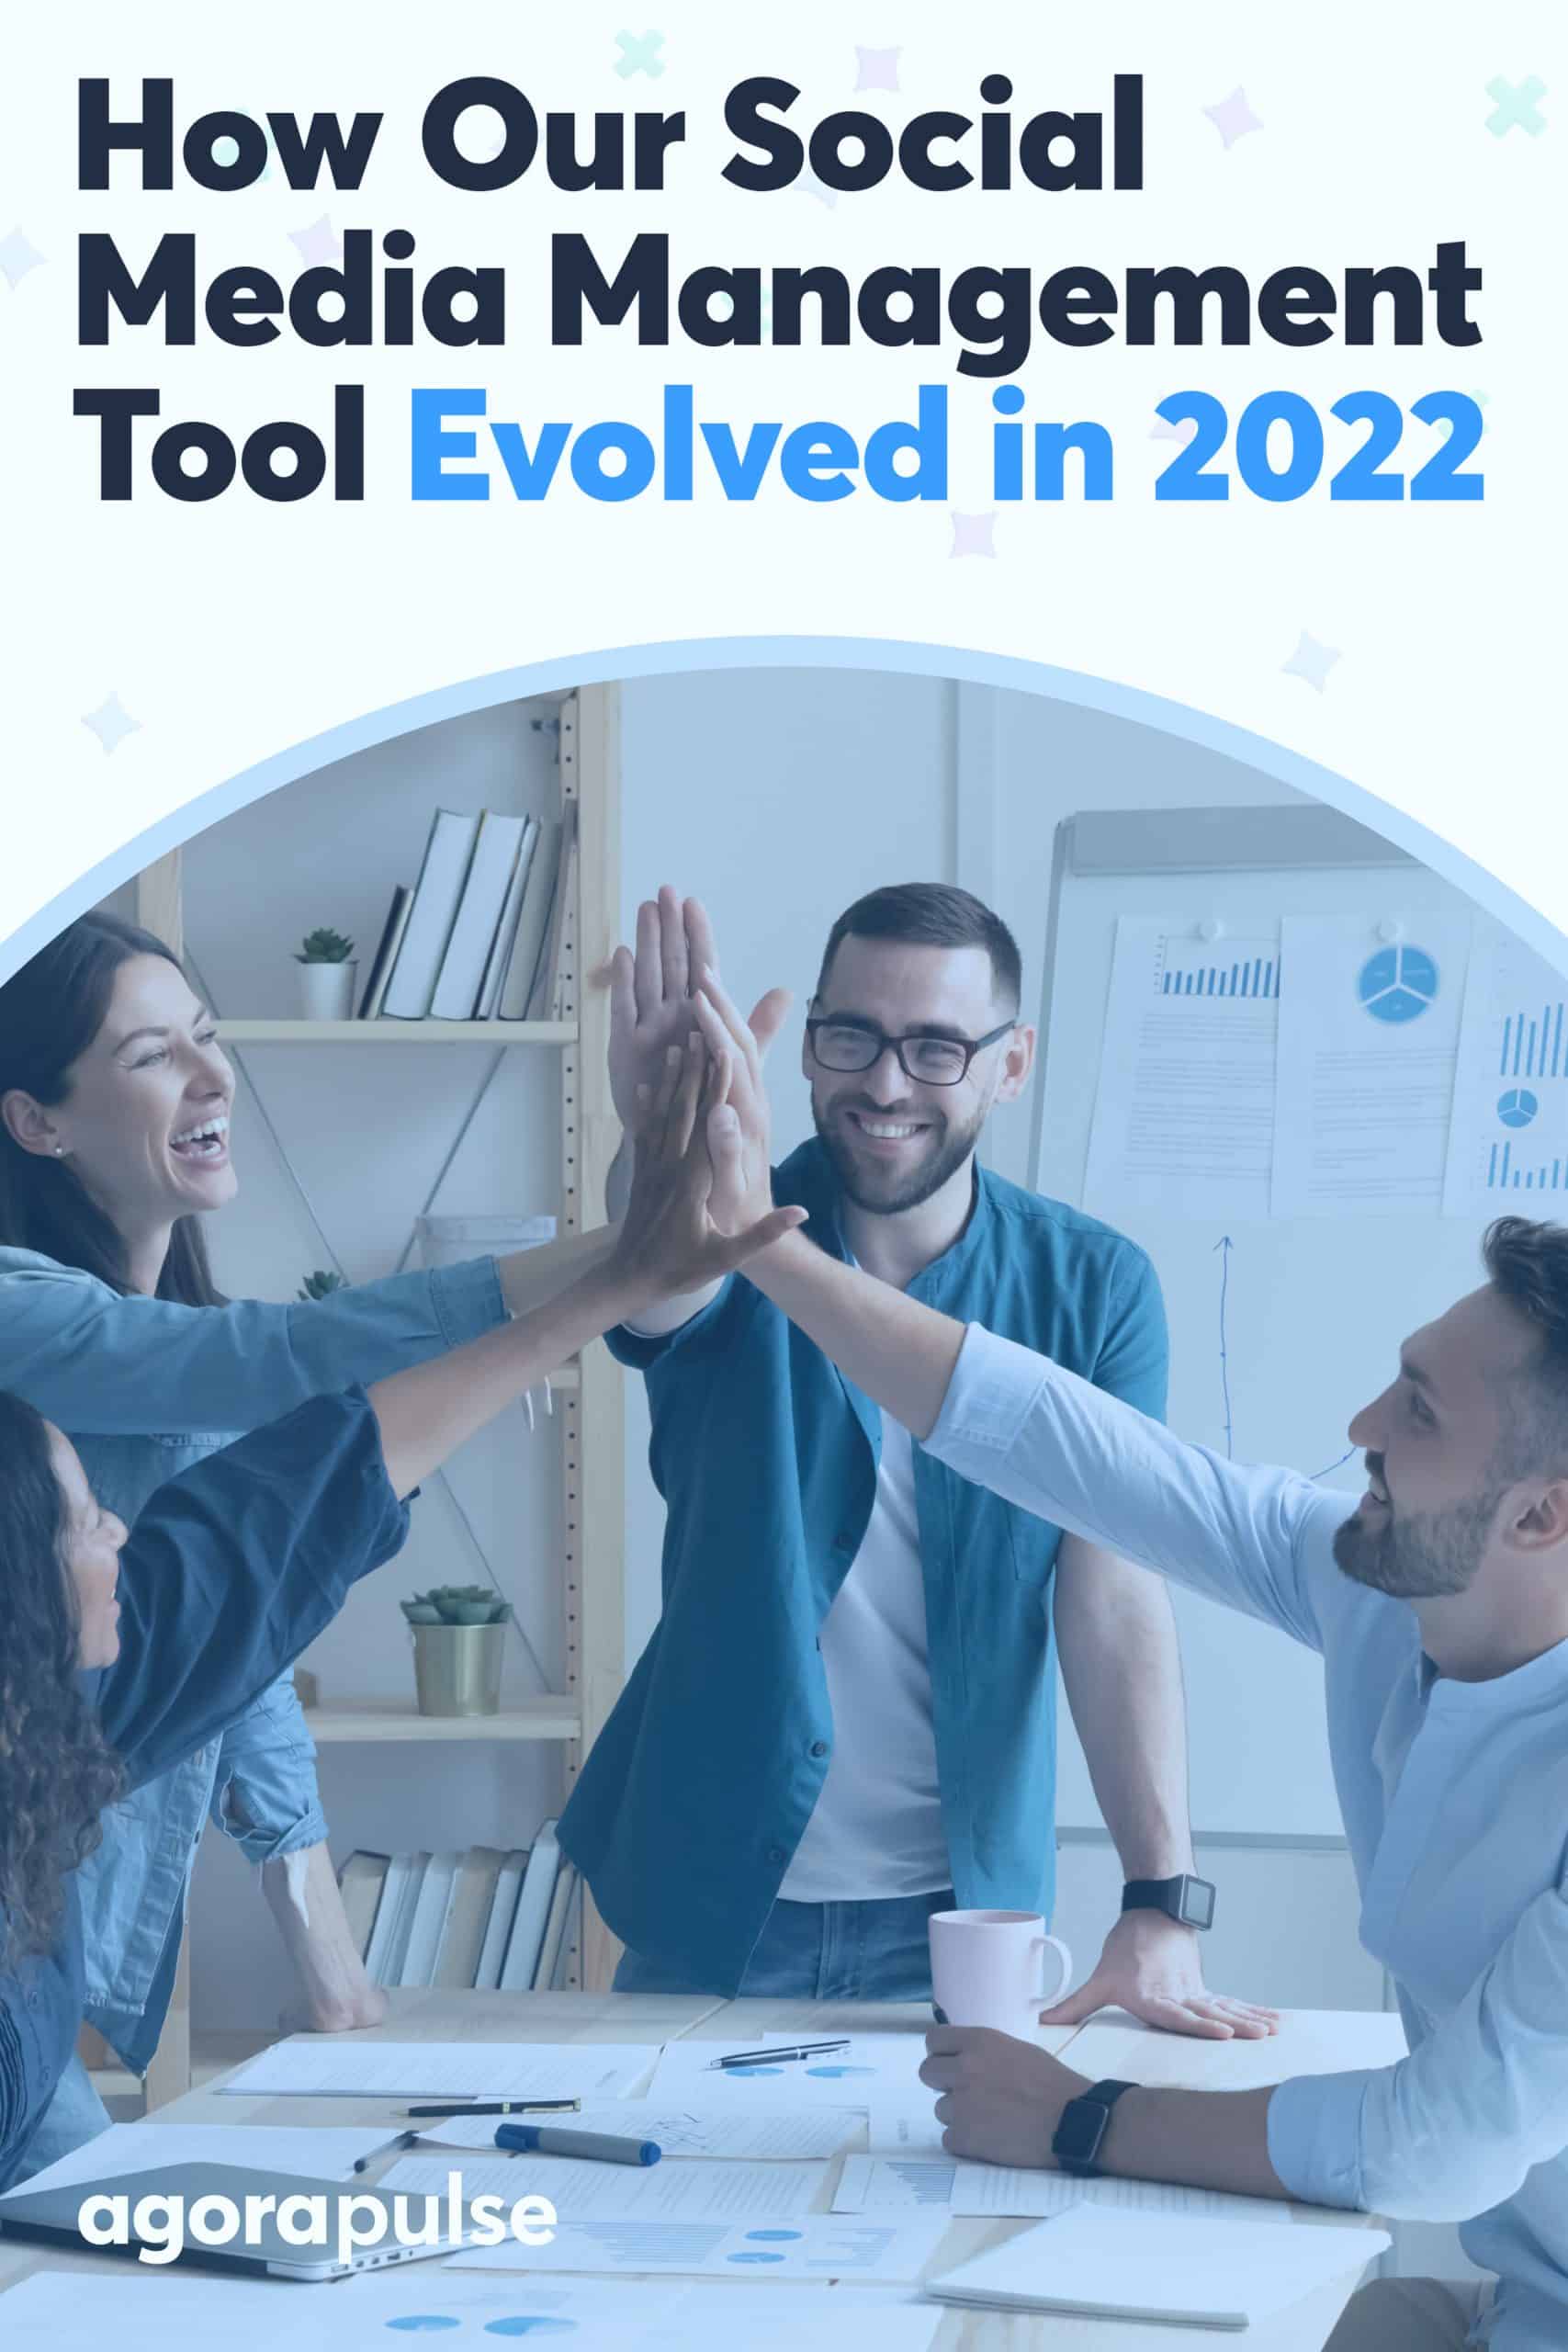 How Our Social Media Management Tool Evolved in 2022 [Infographic]